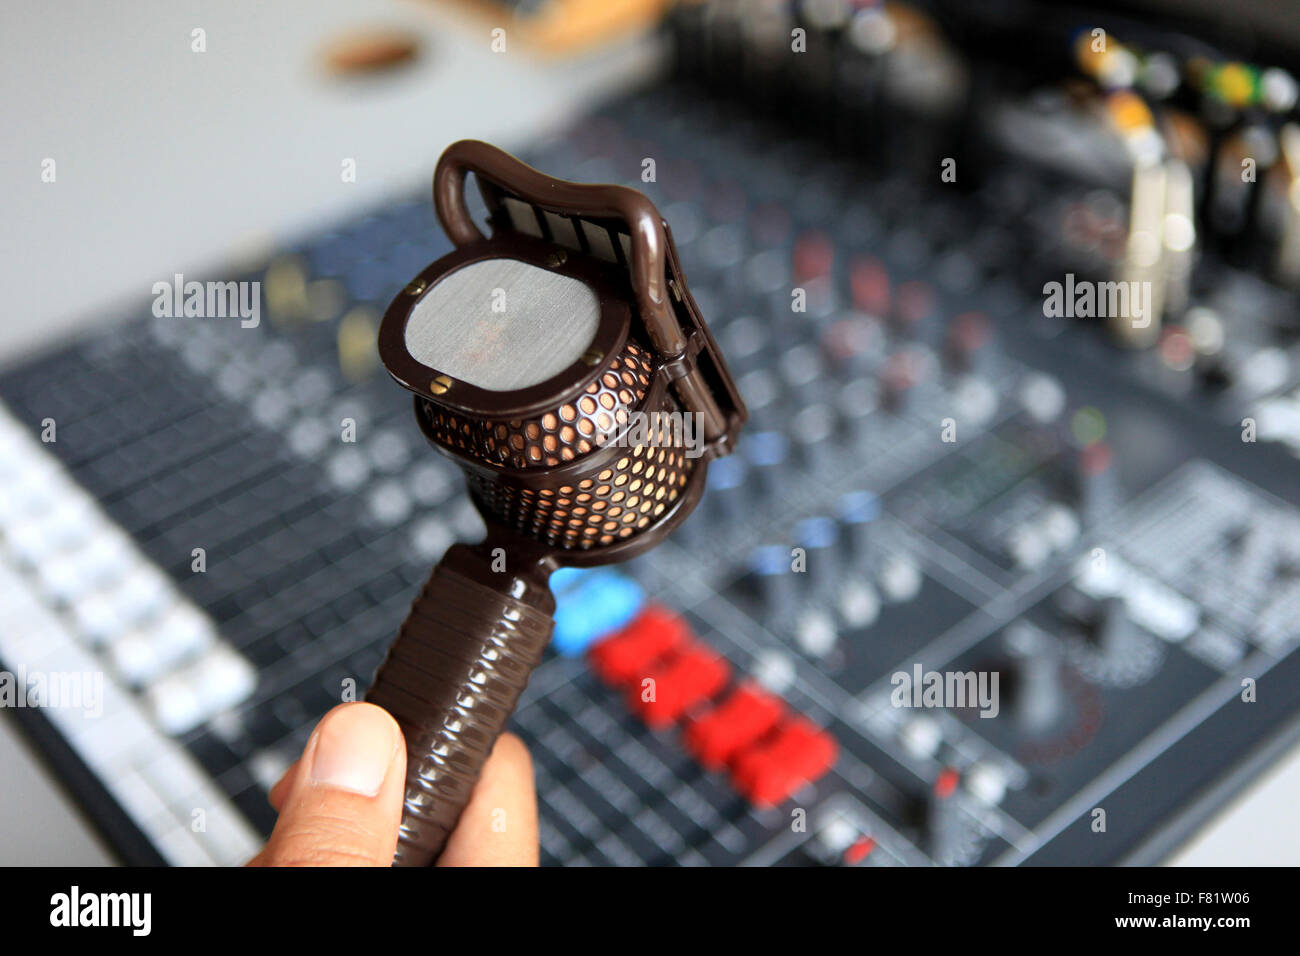 recording microphone & audio mixer used by video & audio editors, sound engineers at radio or tv stations.. Stock Photo